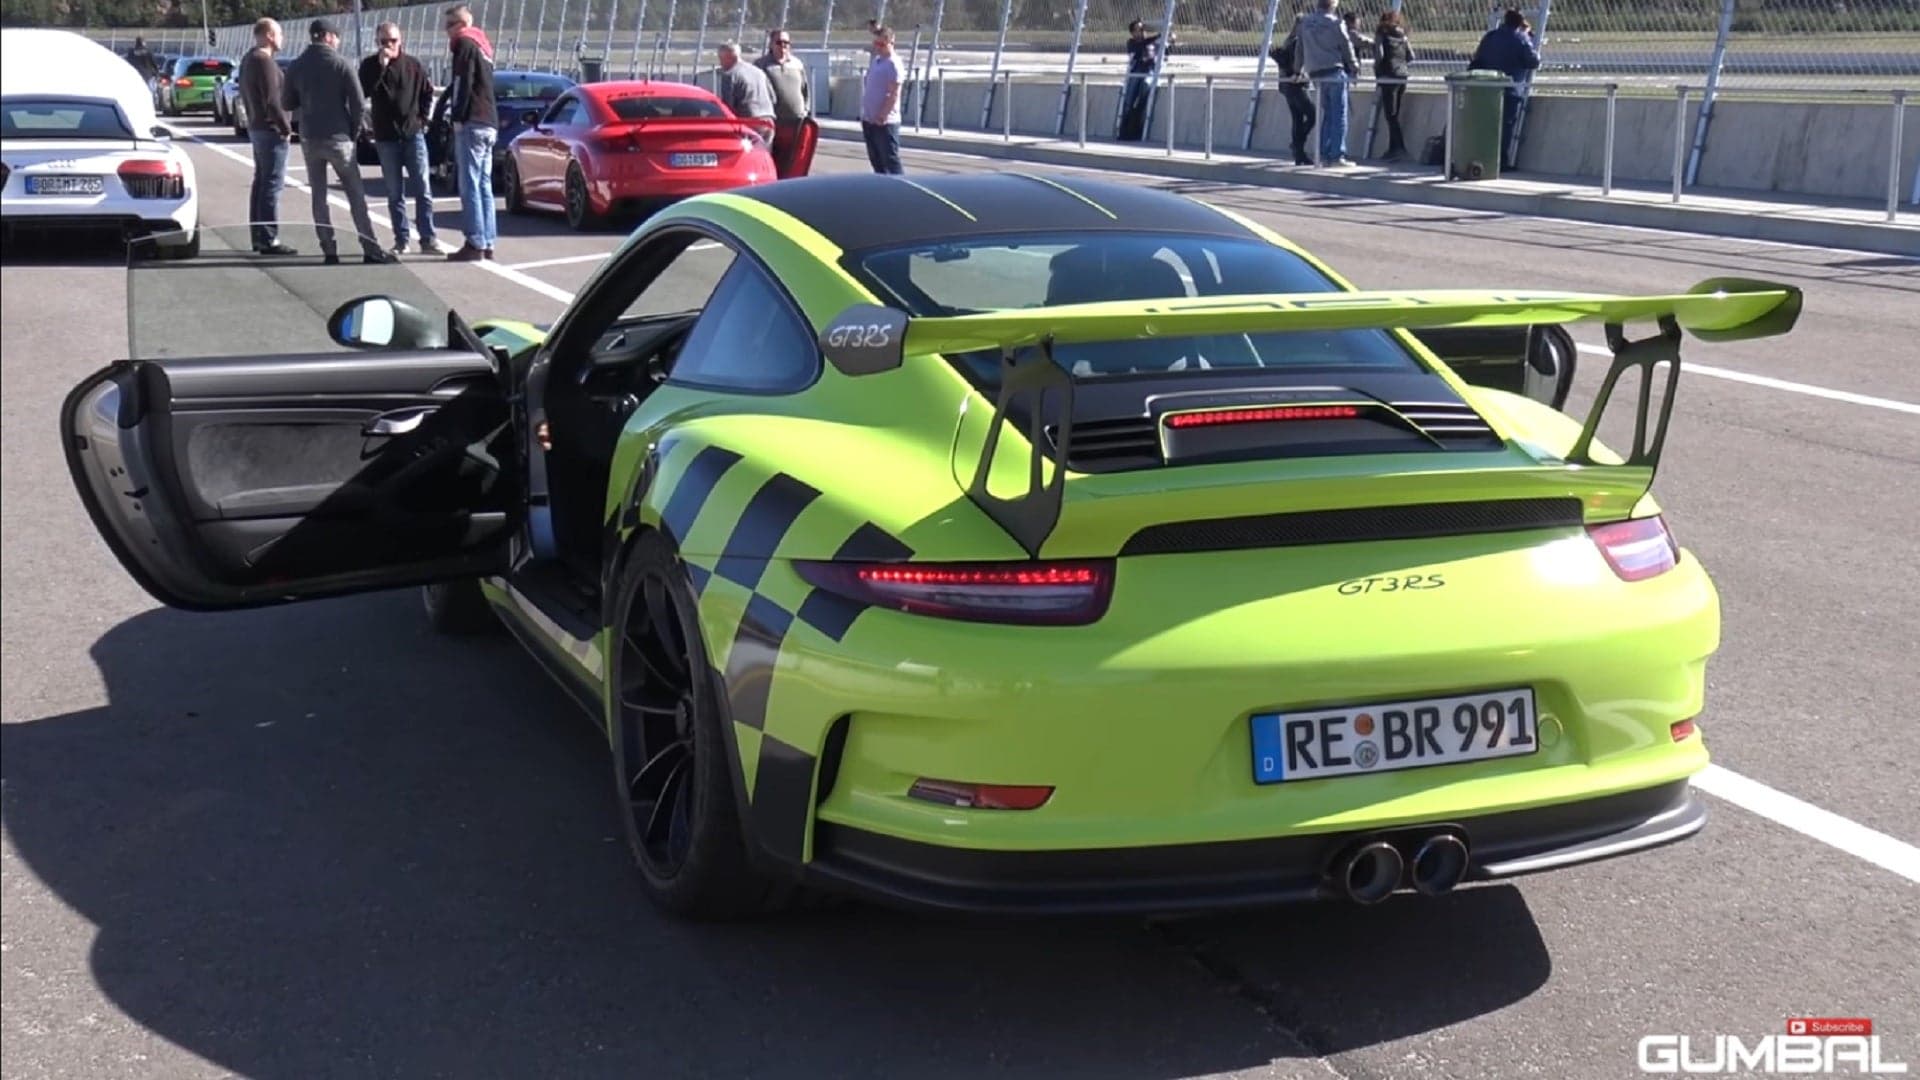 Akrapovic Pumps Up The Volume On This Porsche 991 GT3 RS